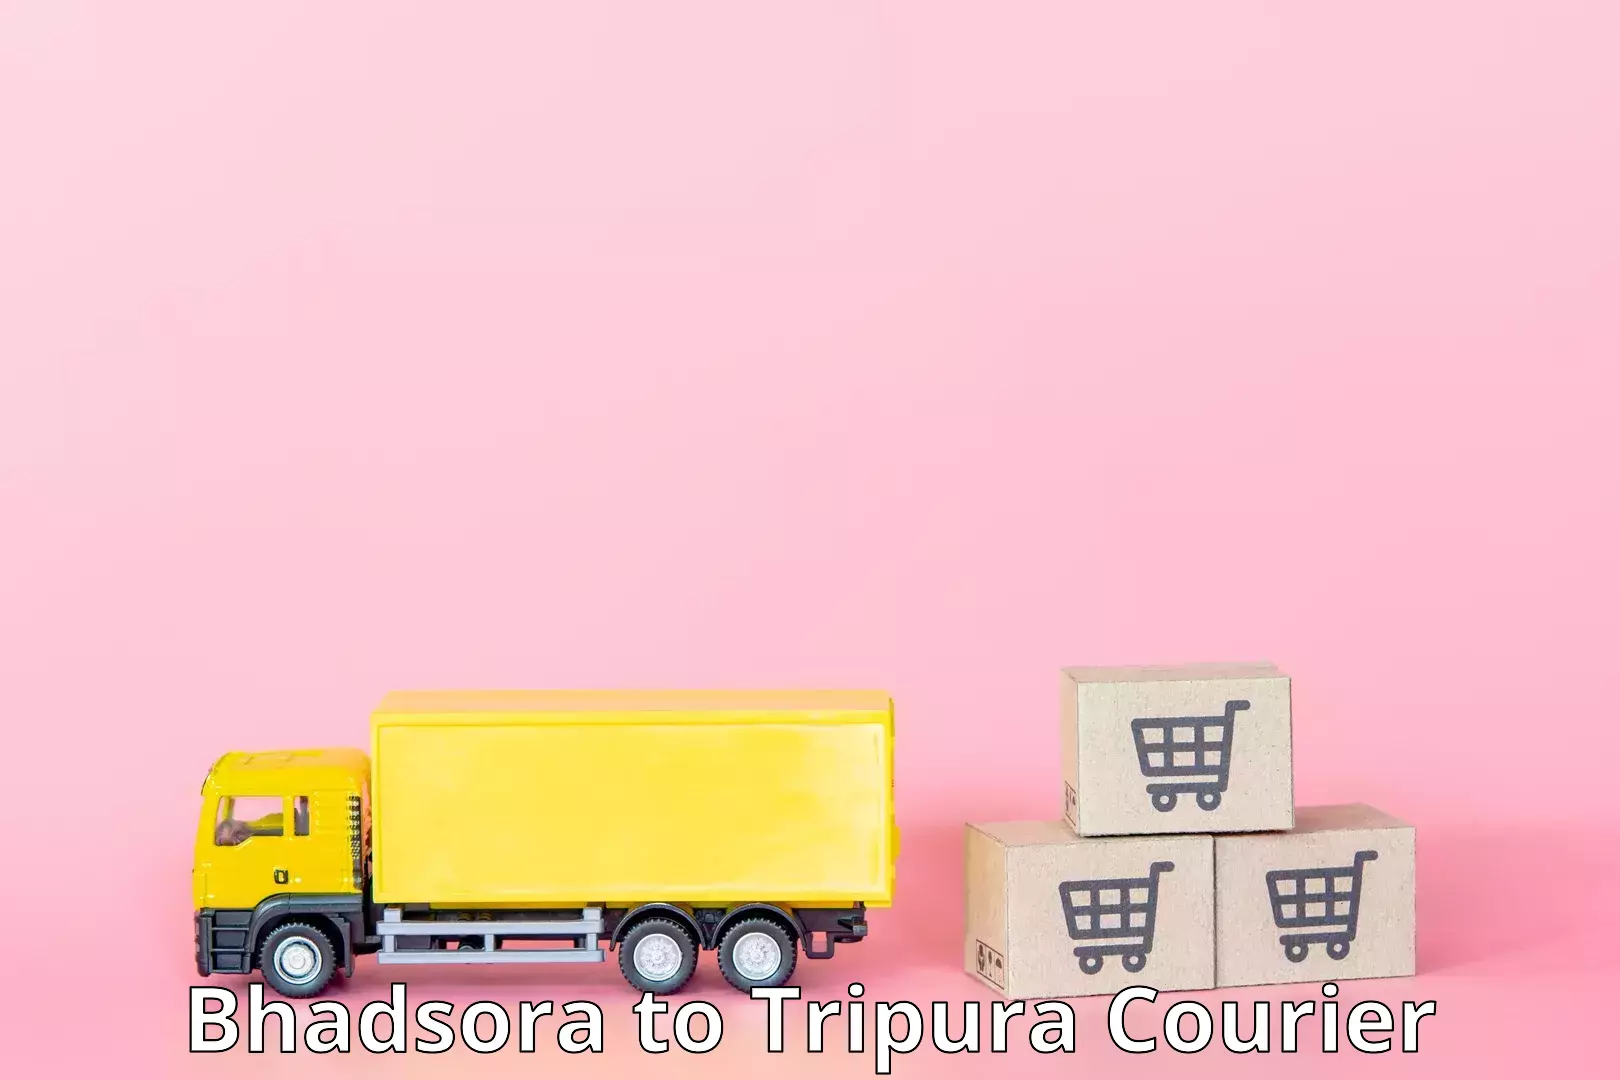 Secure shipping methods Bhadsora to Udaipur Tripura